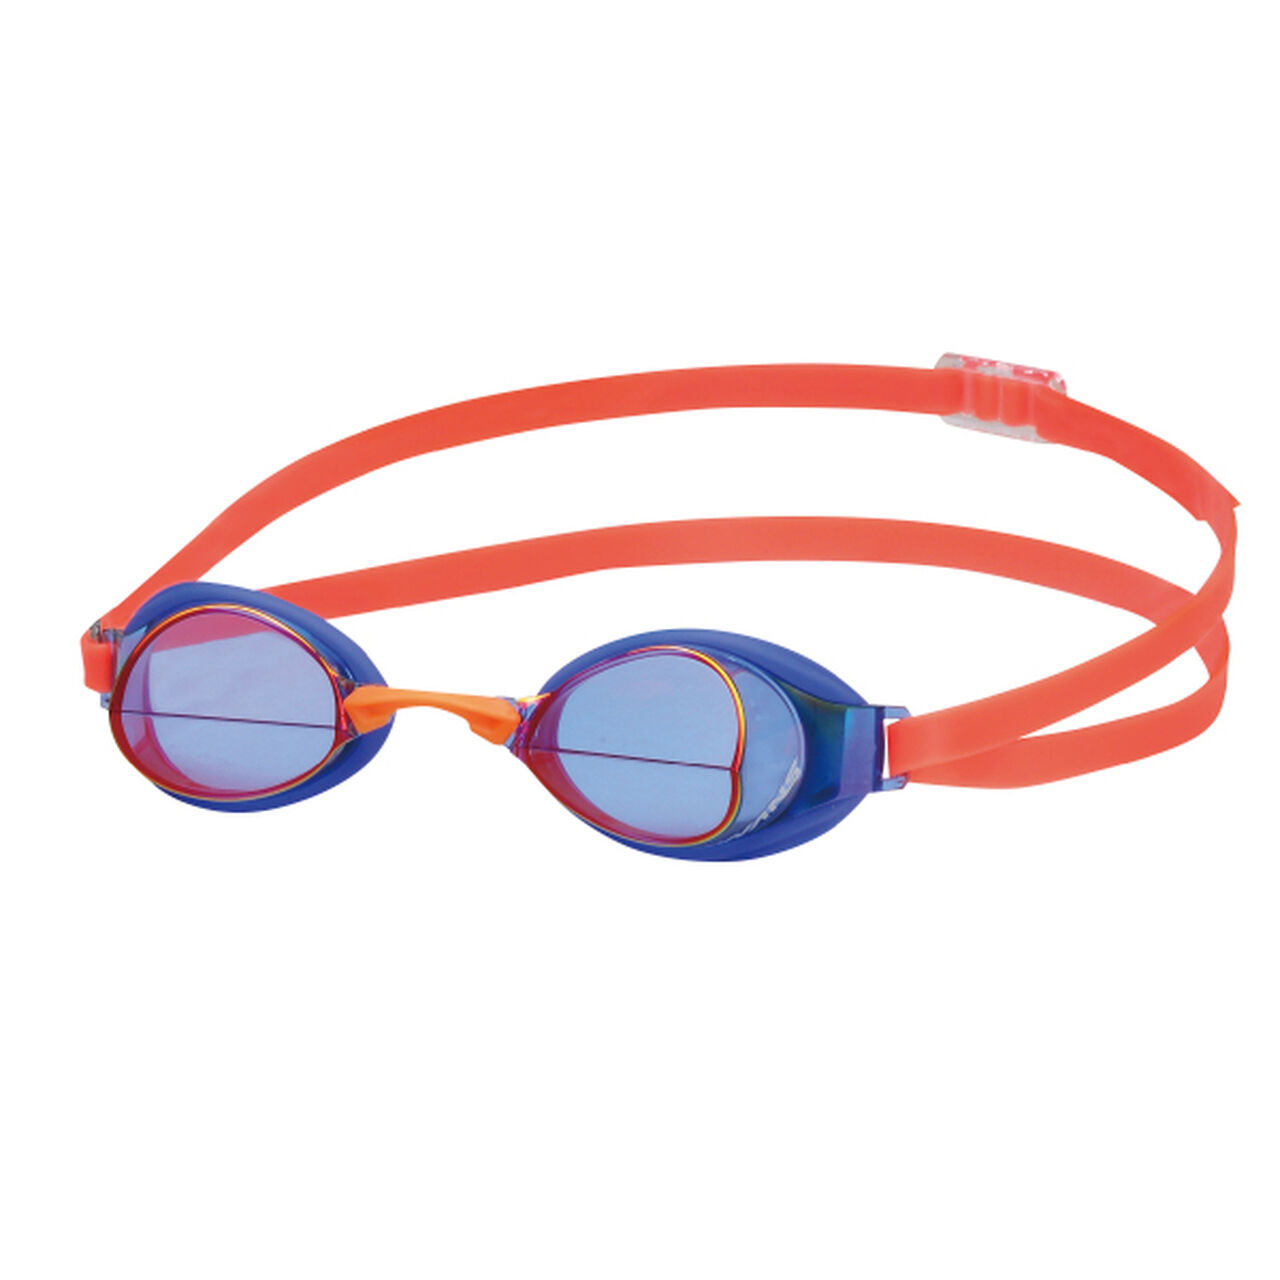 SWANS IGNITION-M NASHD Navy Lens x Shadow Mirror SWIM GOGGLE,Opt1, large image number 0